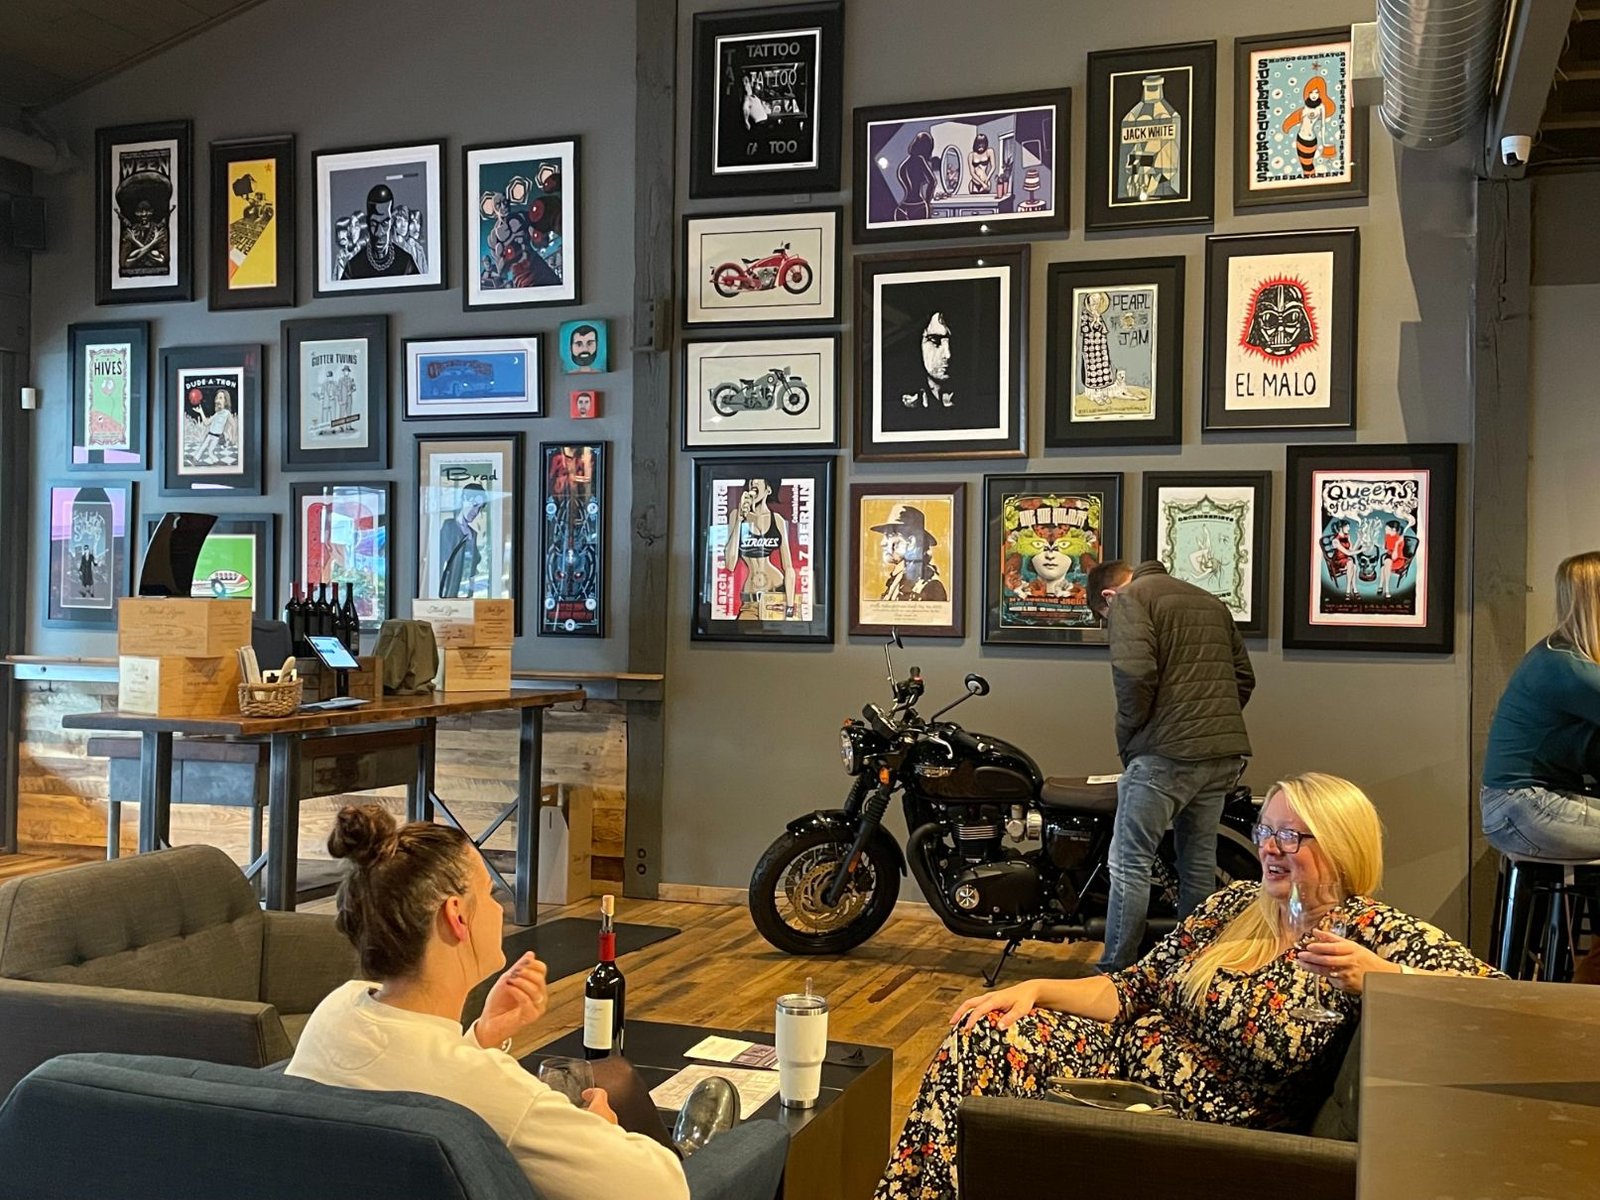 Motorcycles and rock music posters are the decor at Mark Ryan Winery